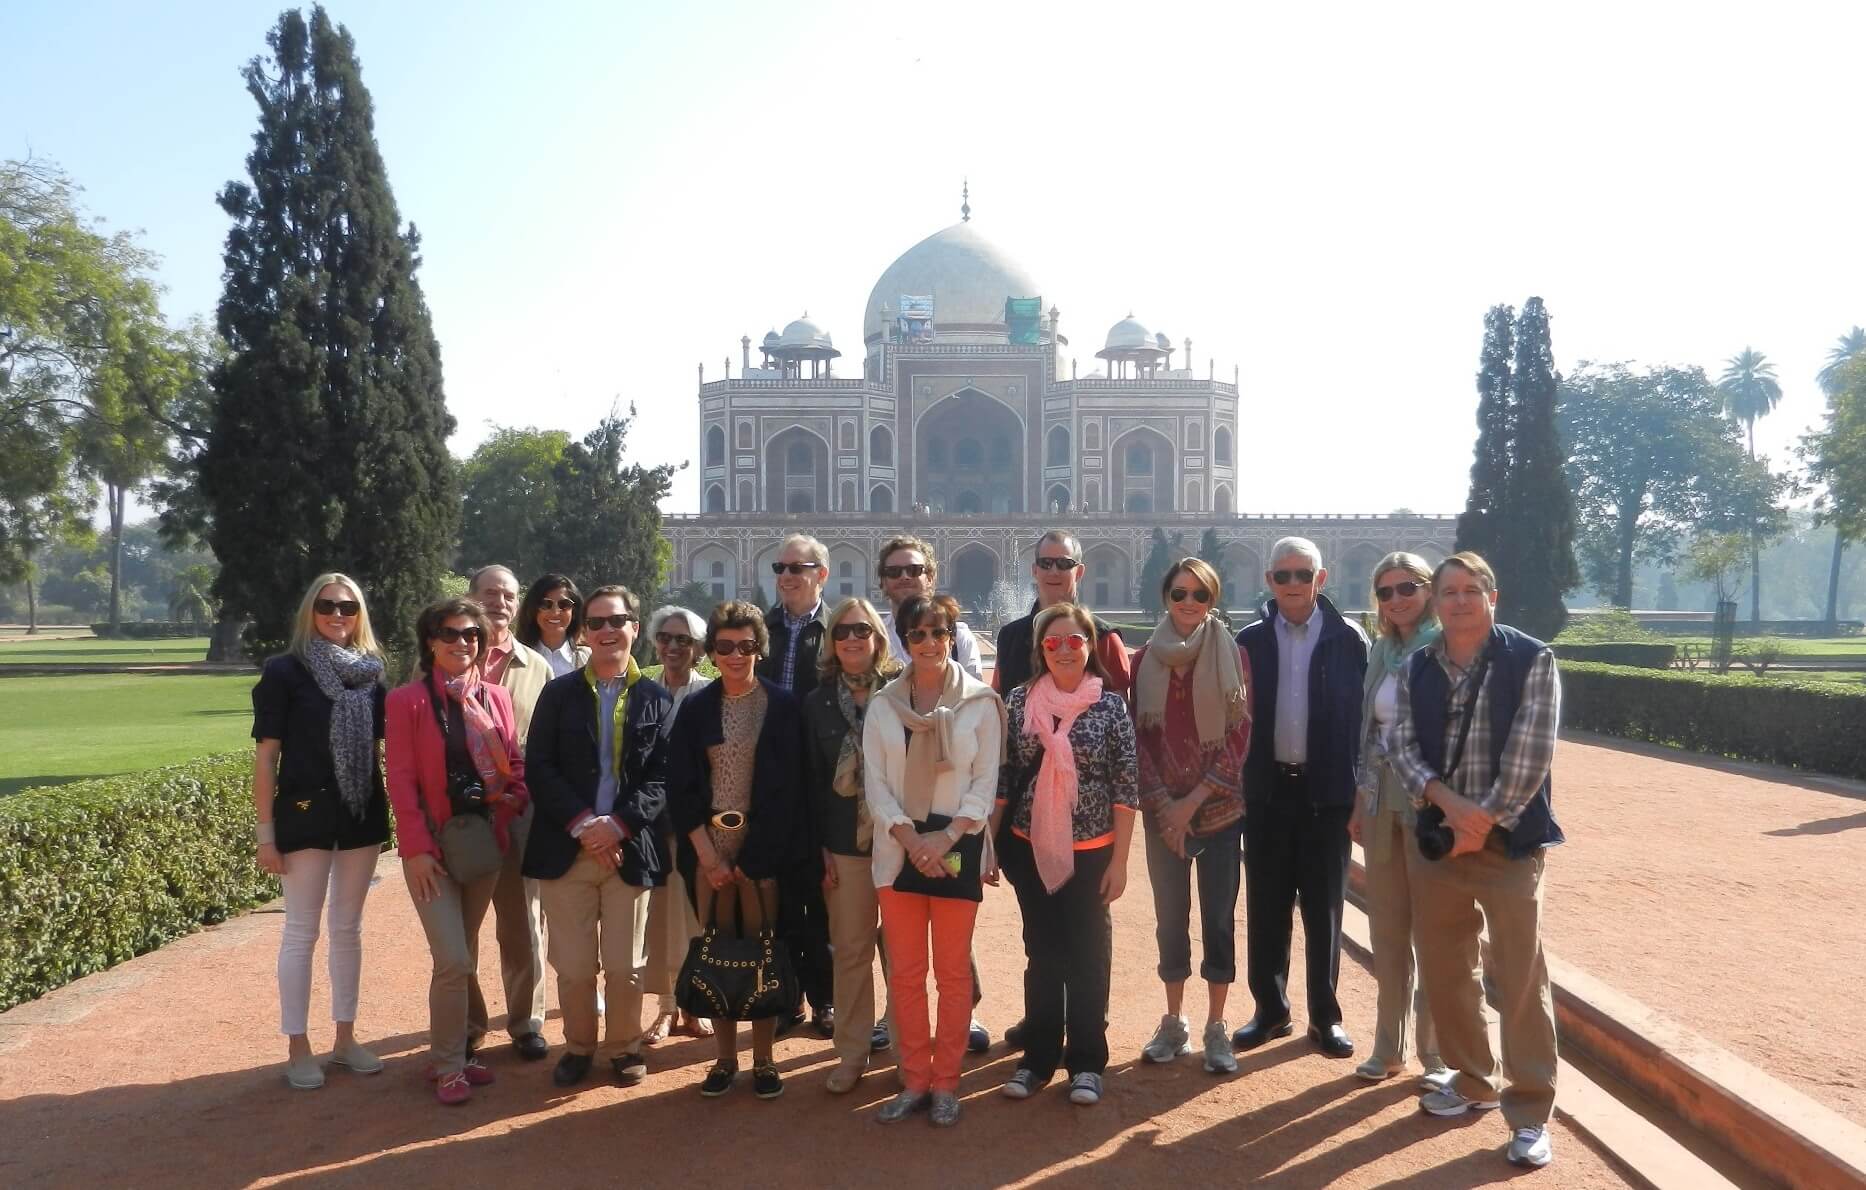 Members of Houston's Museum of Fine Arts Board of Trustees visiting Humayun's Tomb in Delhi, India - Aga Khan Trust for Culture